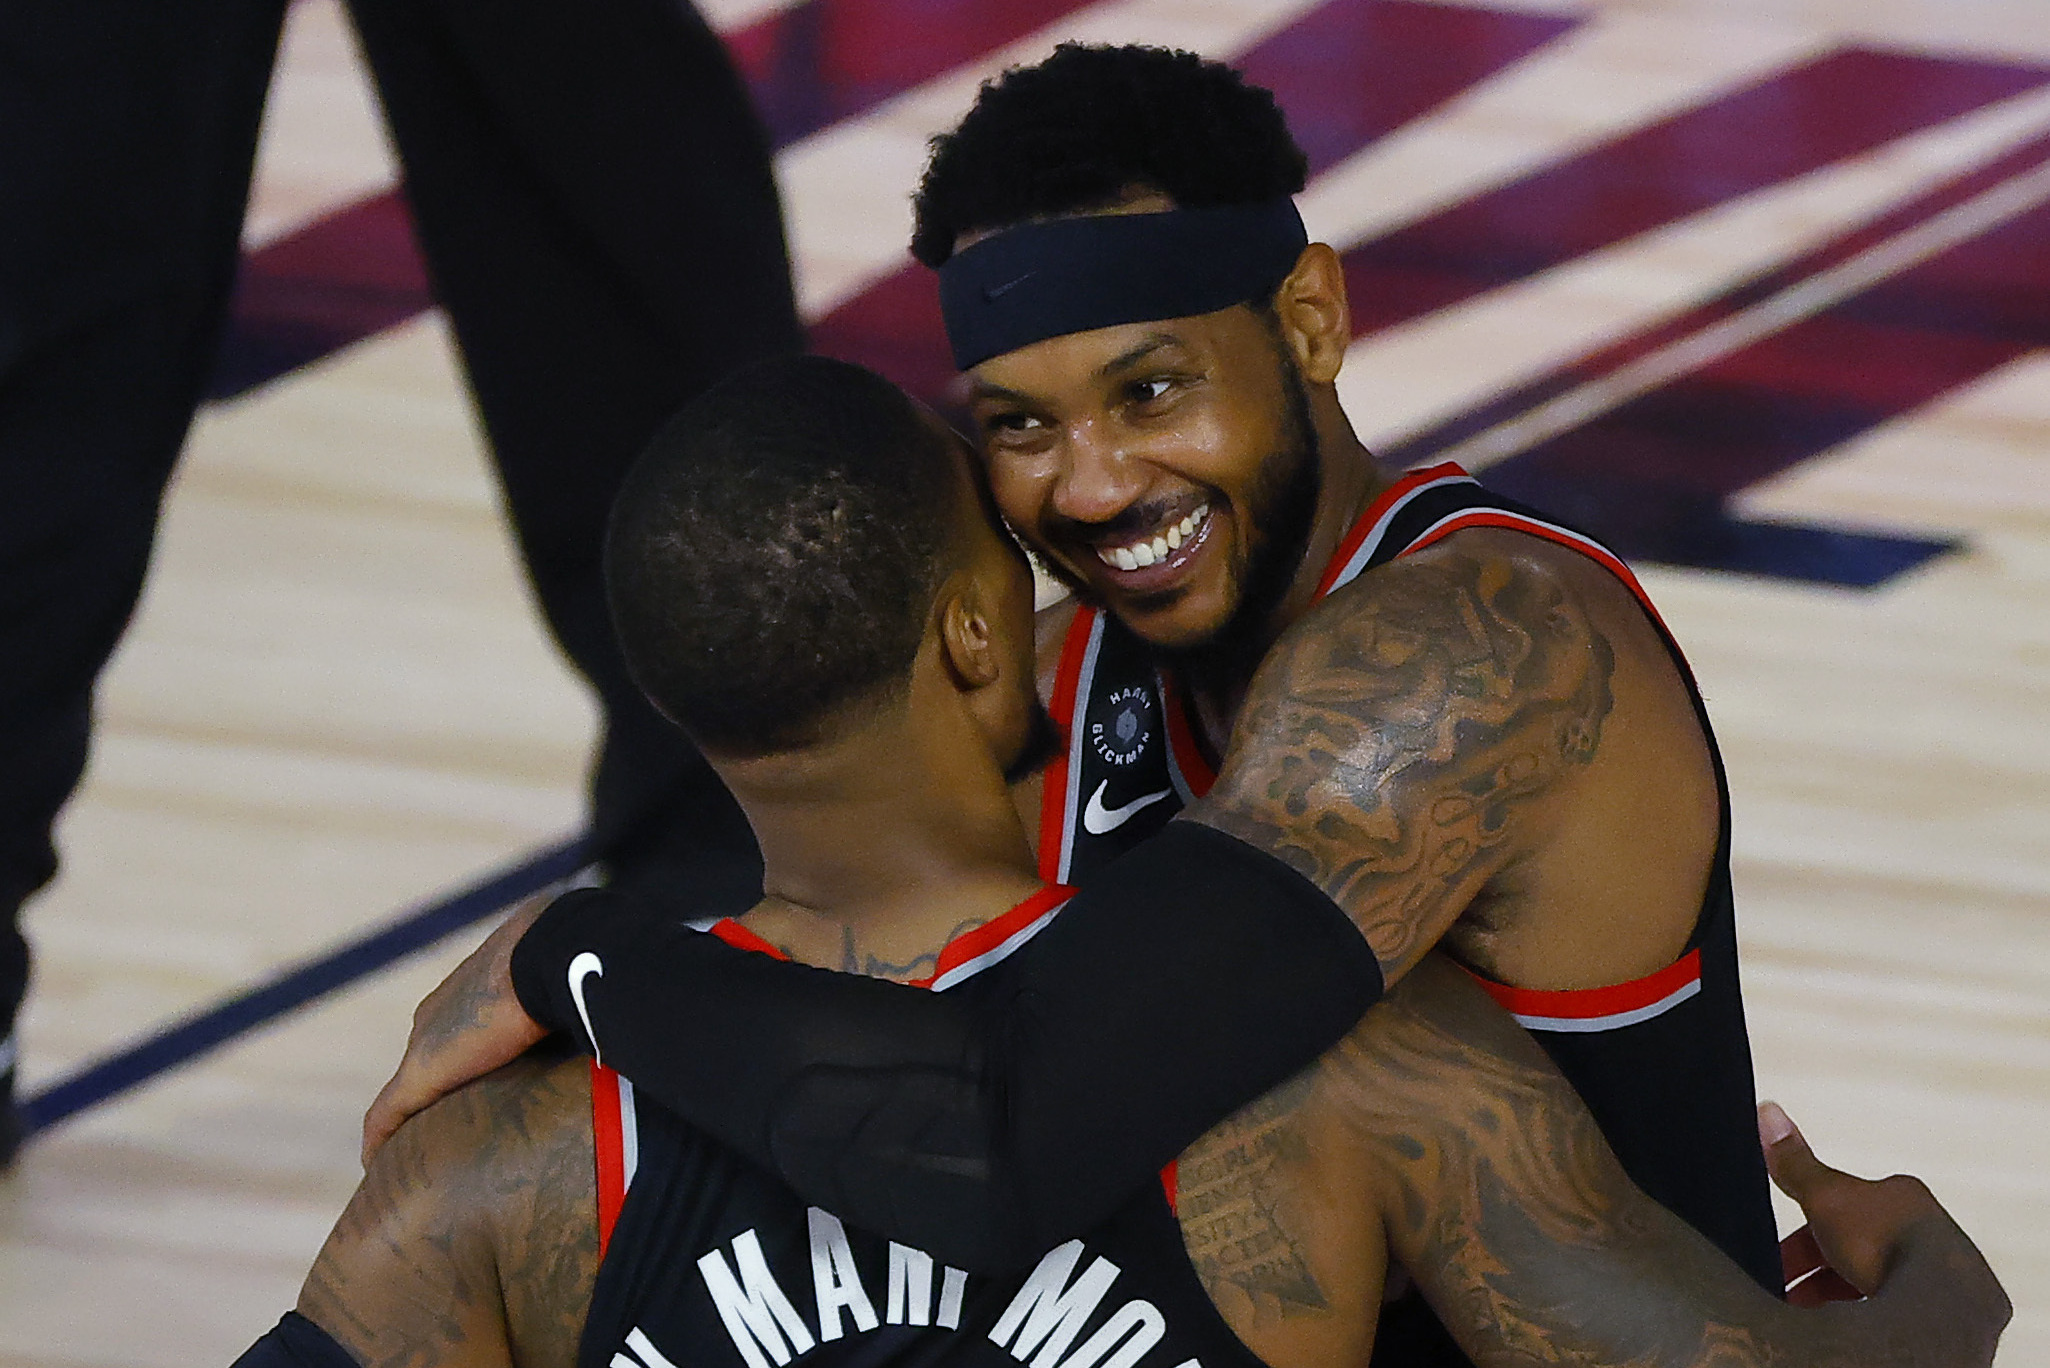 Carmelo Anthony on Damian Lillard: 'He's the top guy I've played